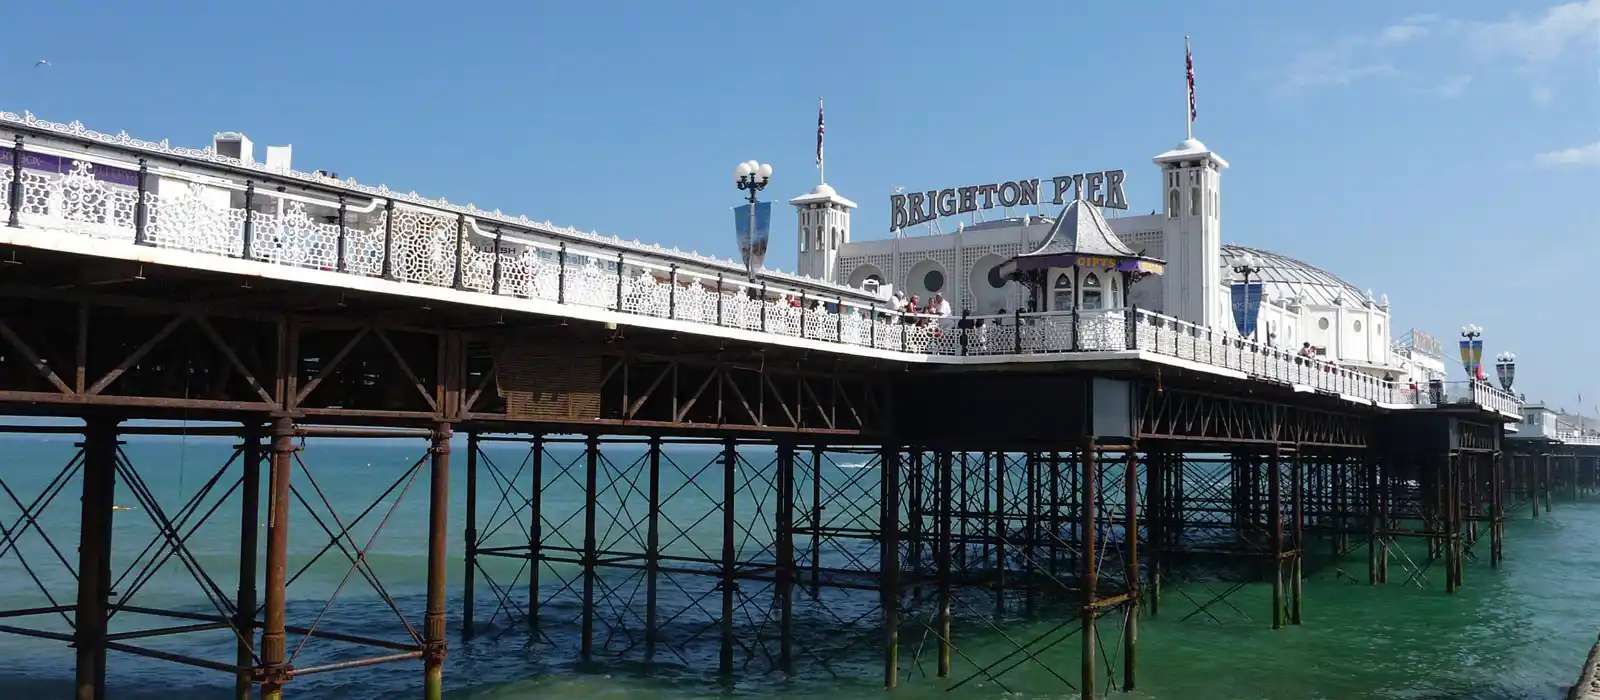 Which are the top 10 British piers?